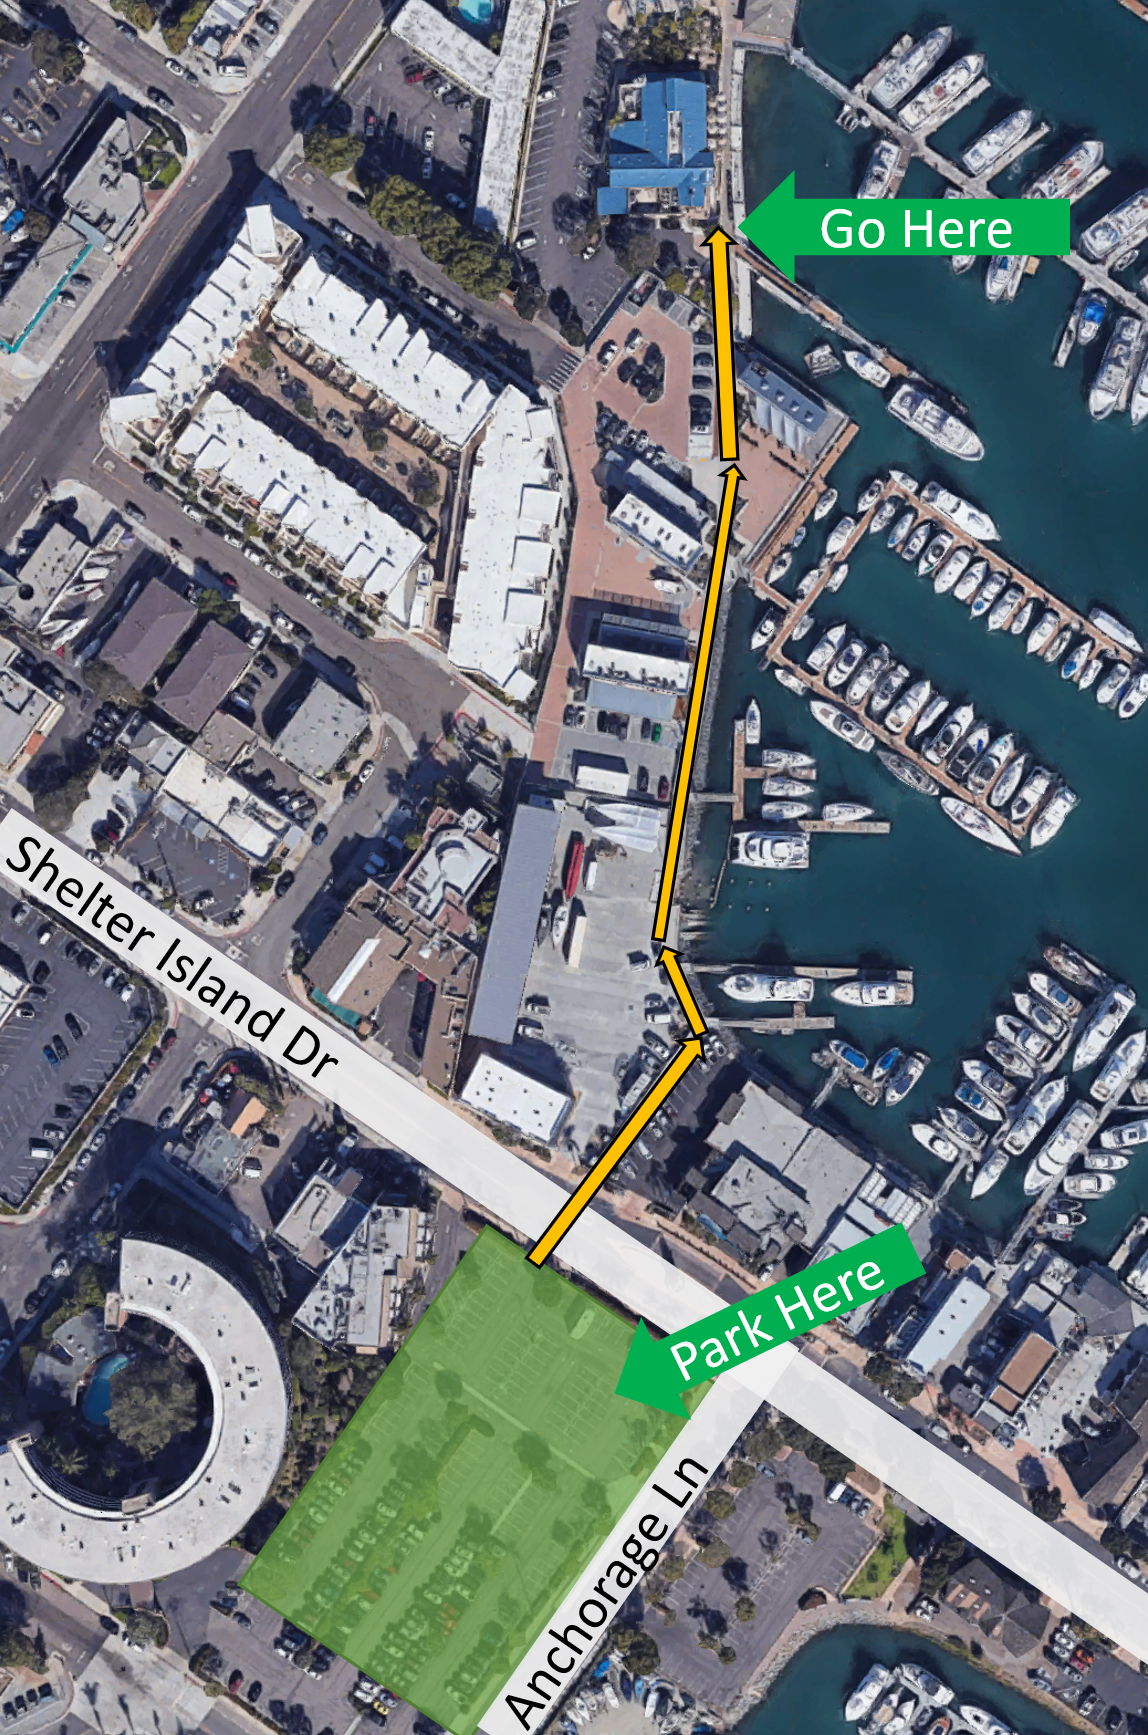 Recommended parking lot location relative to event venue.